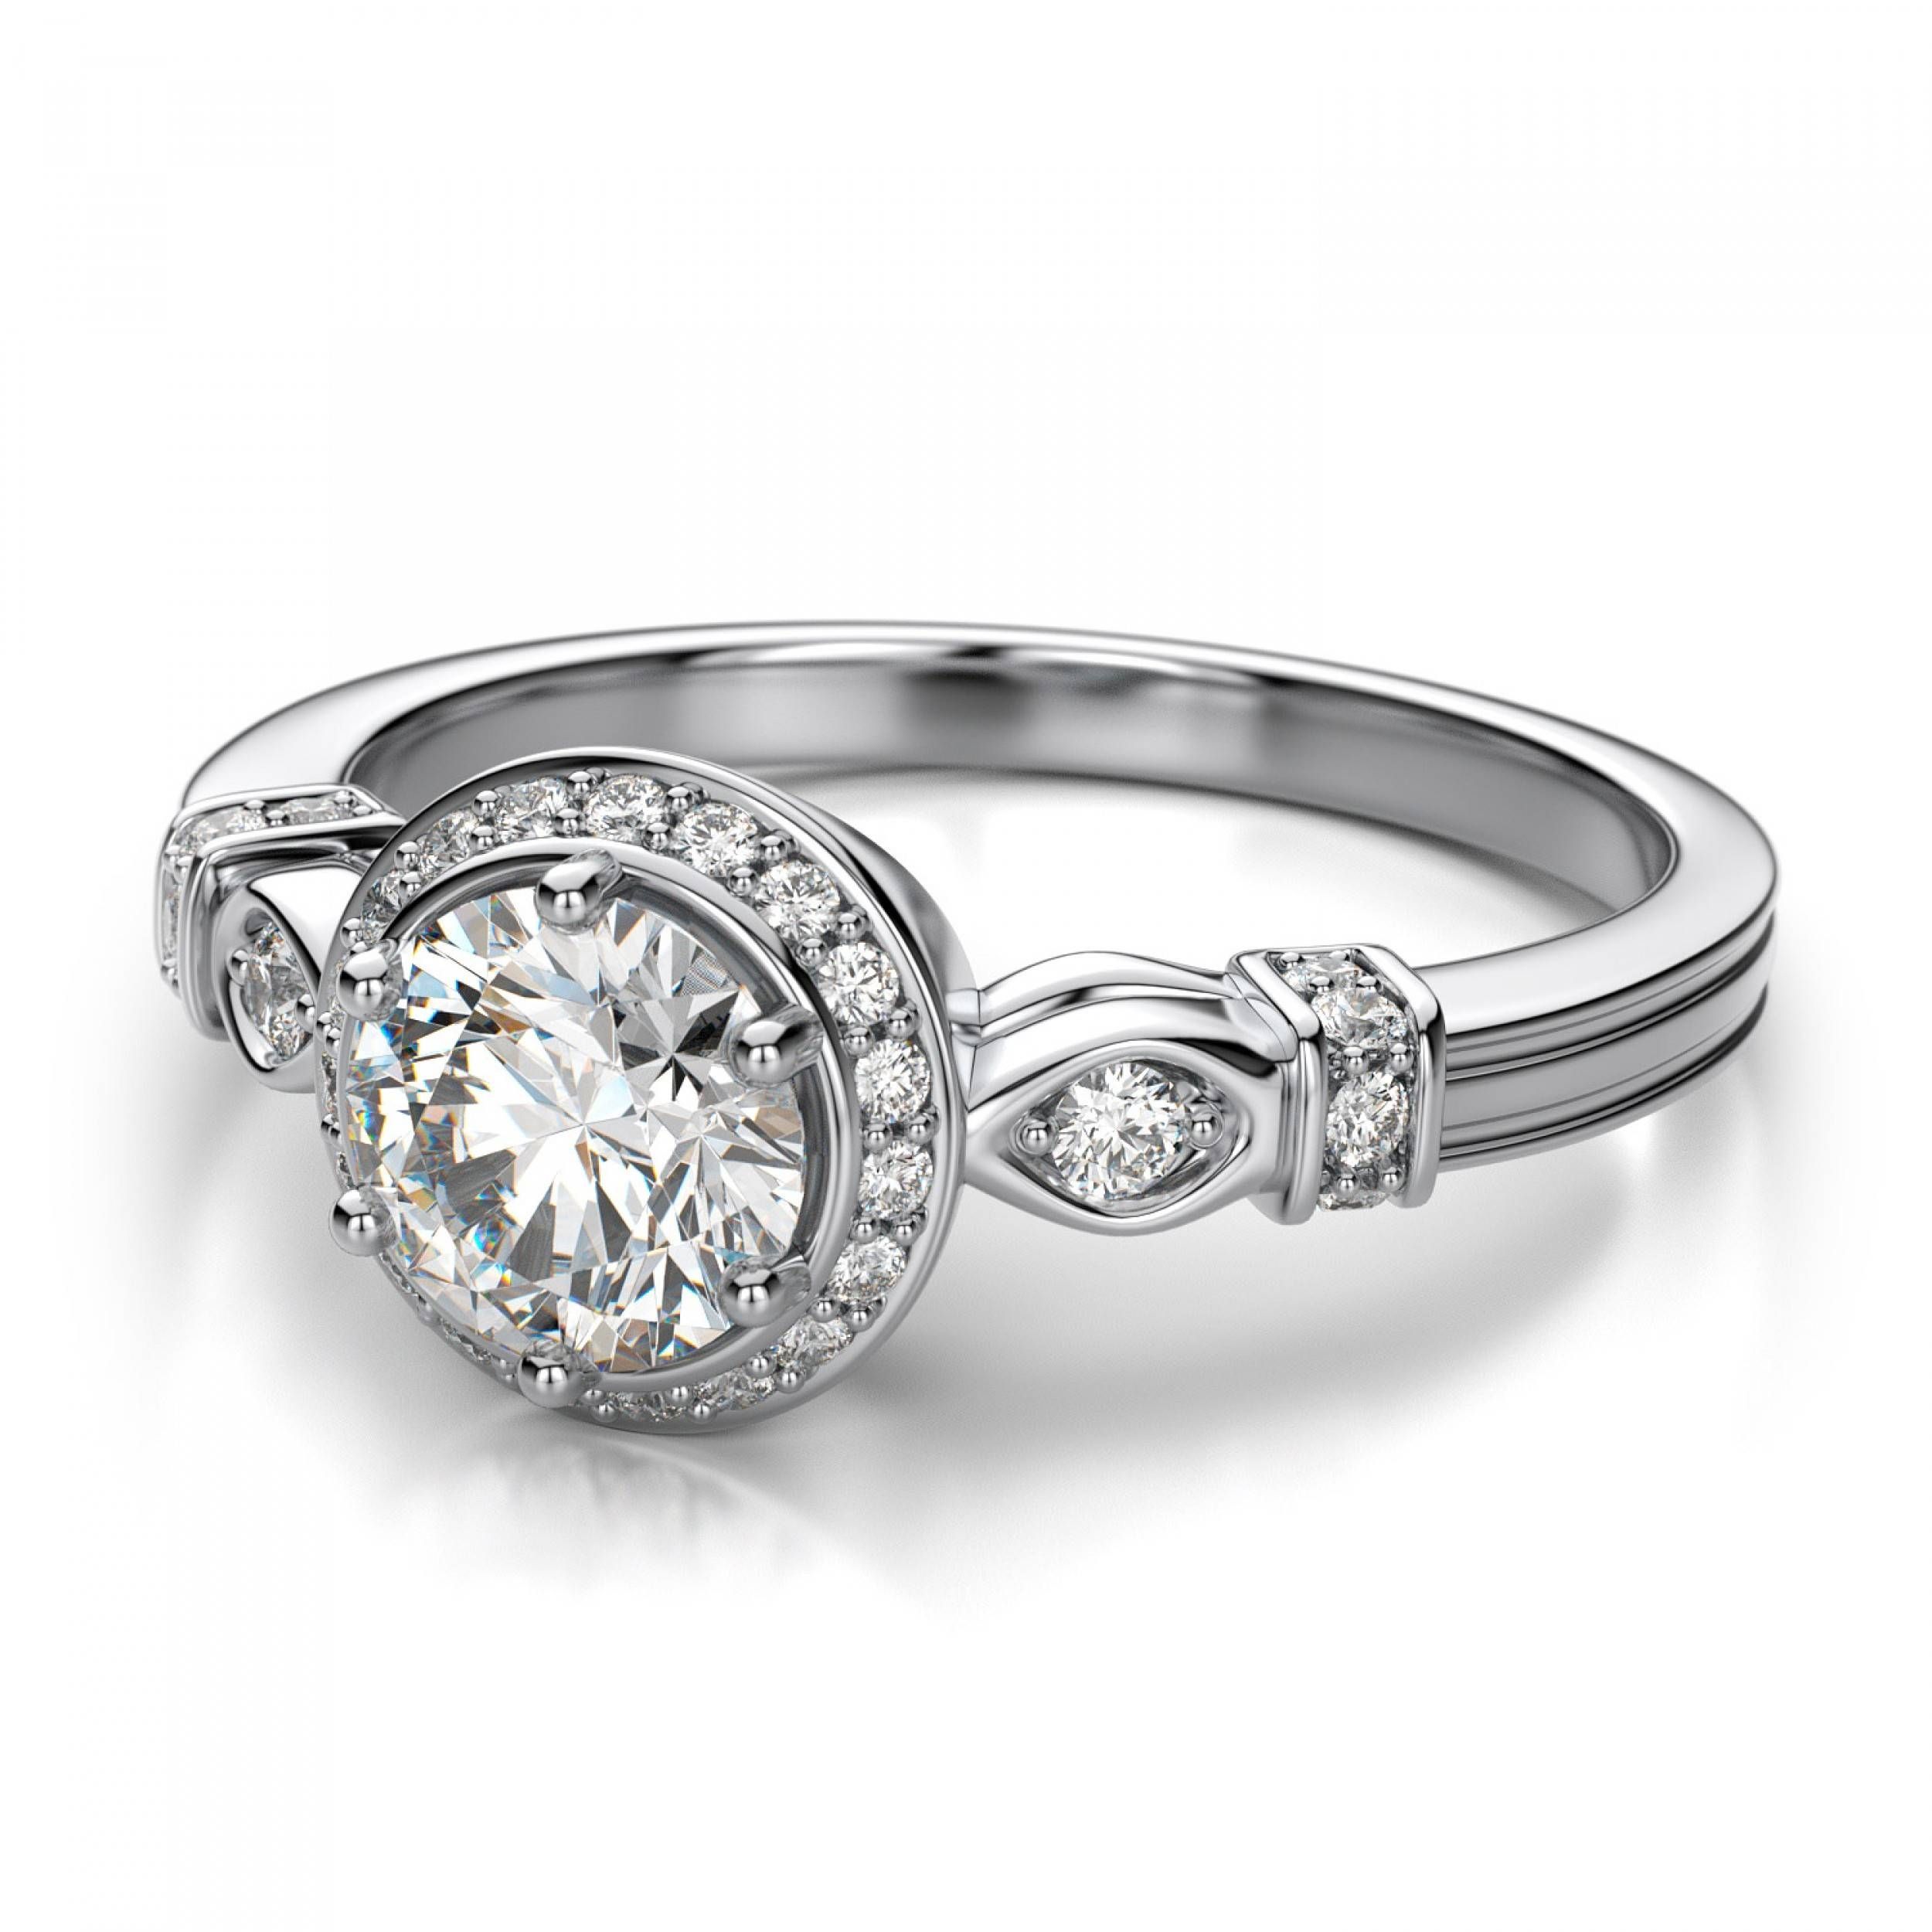 Round Vintage Engagement Rings | Wedding, Promise, Diamond With Regard To Antique Round Diamond Engagement Rings (View 2 of 15)